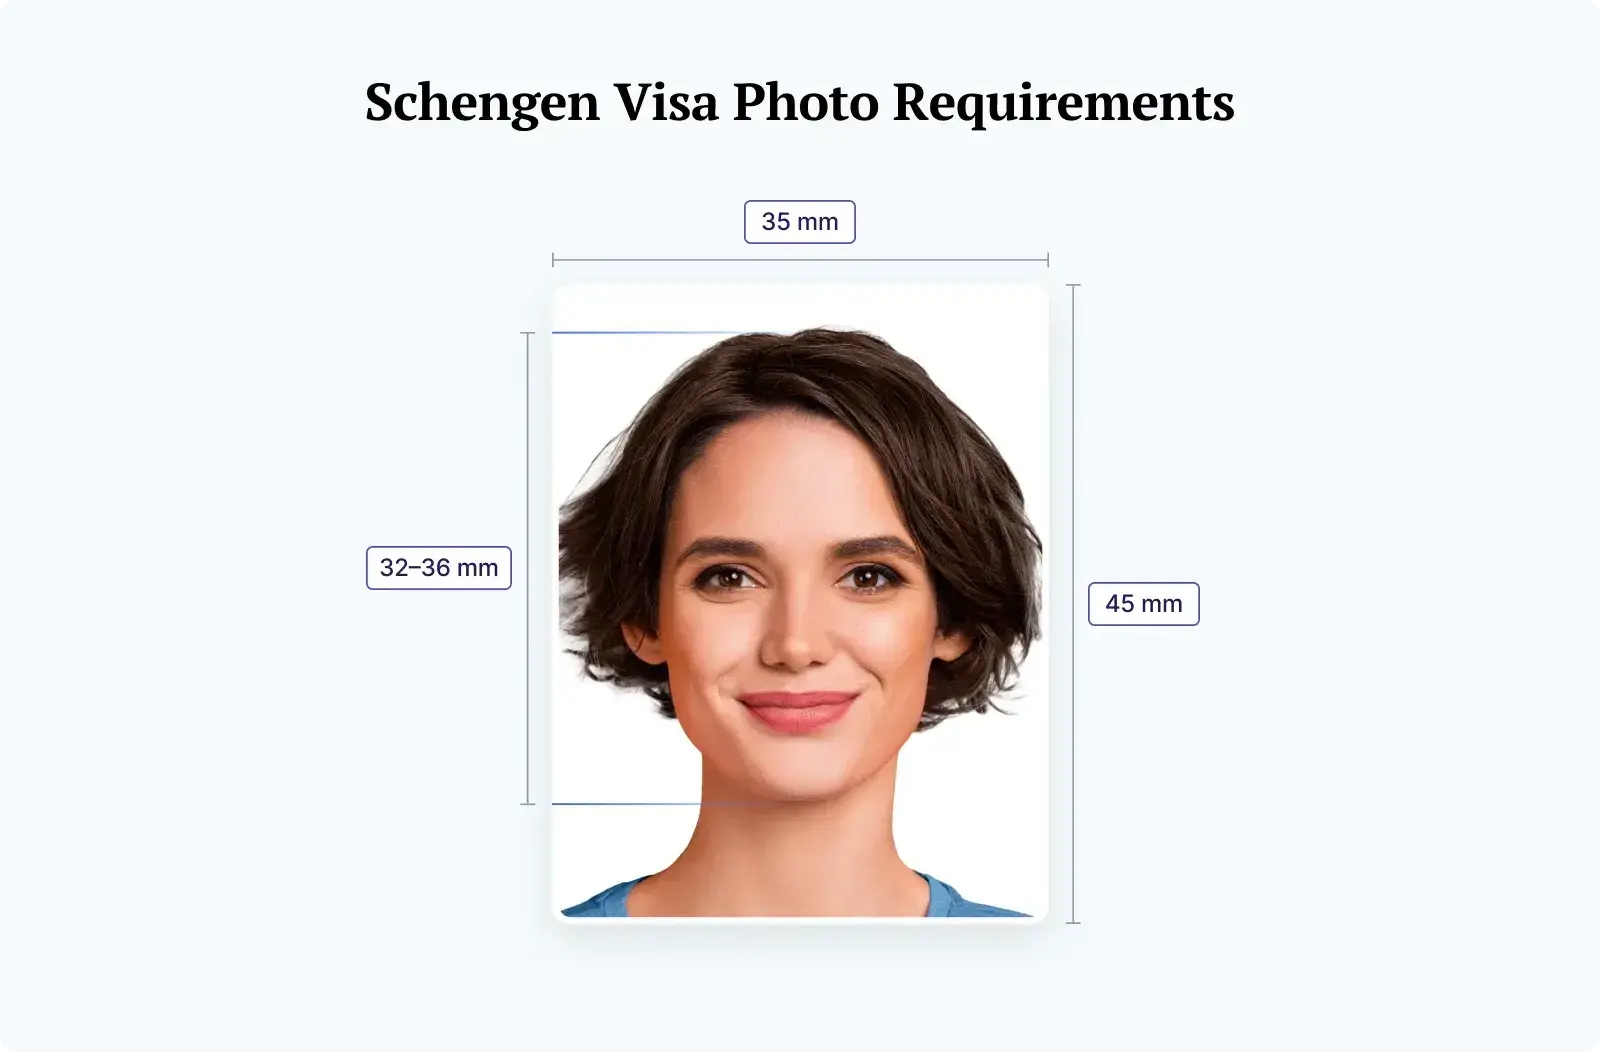 A photo for a Schengen visa with detailed sizing information.